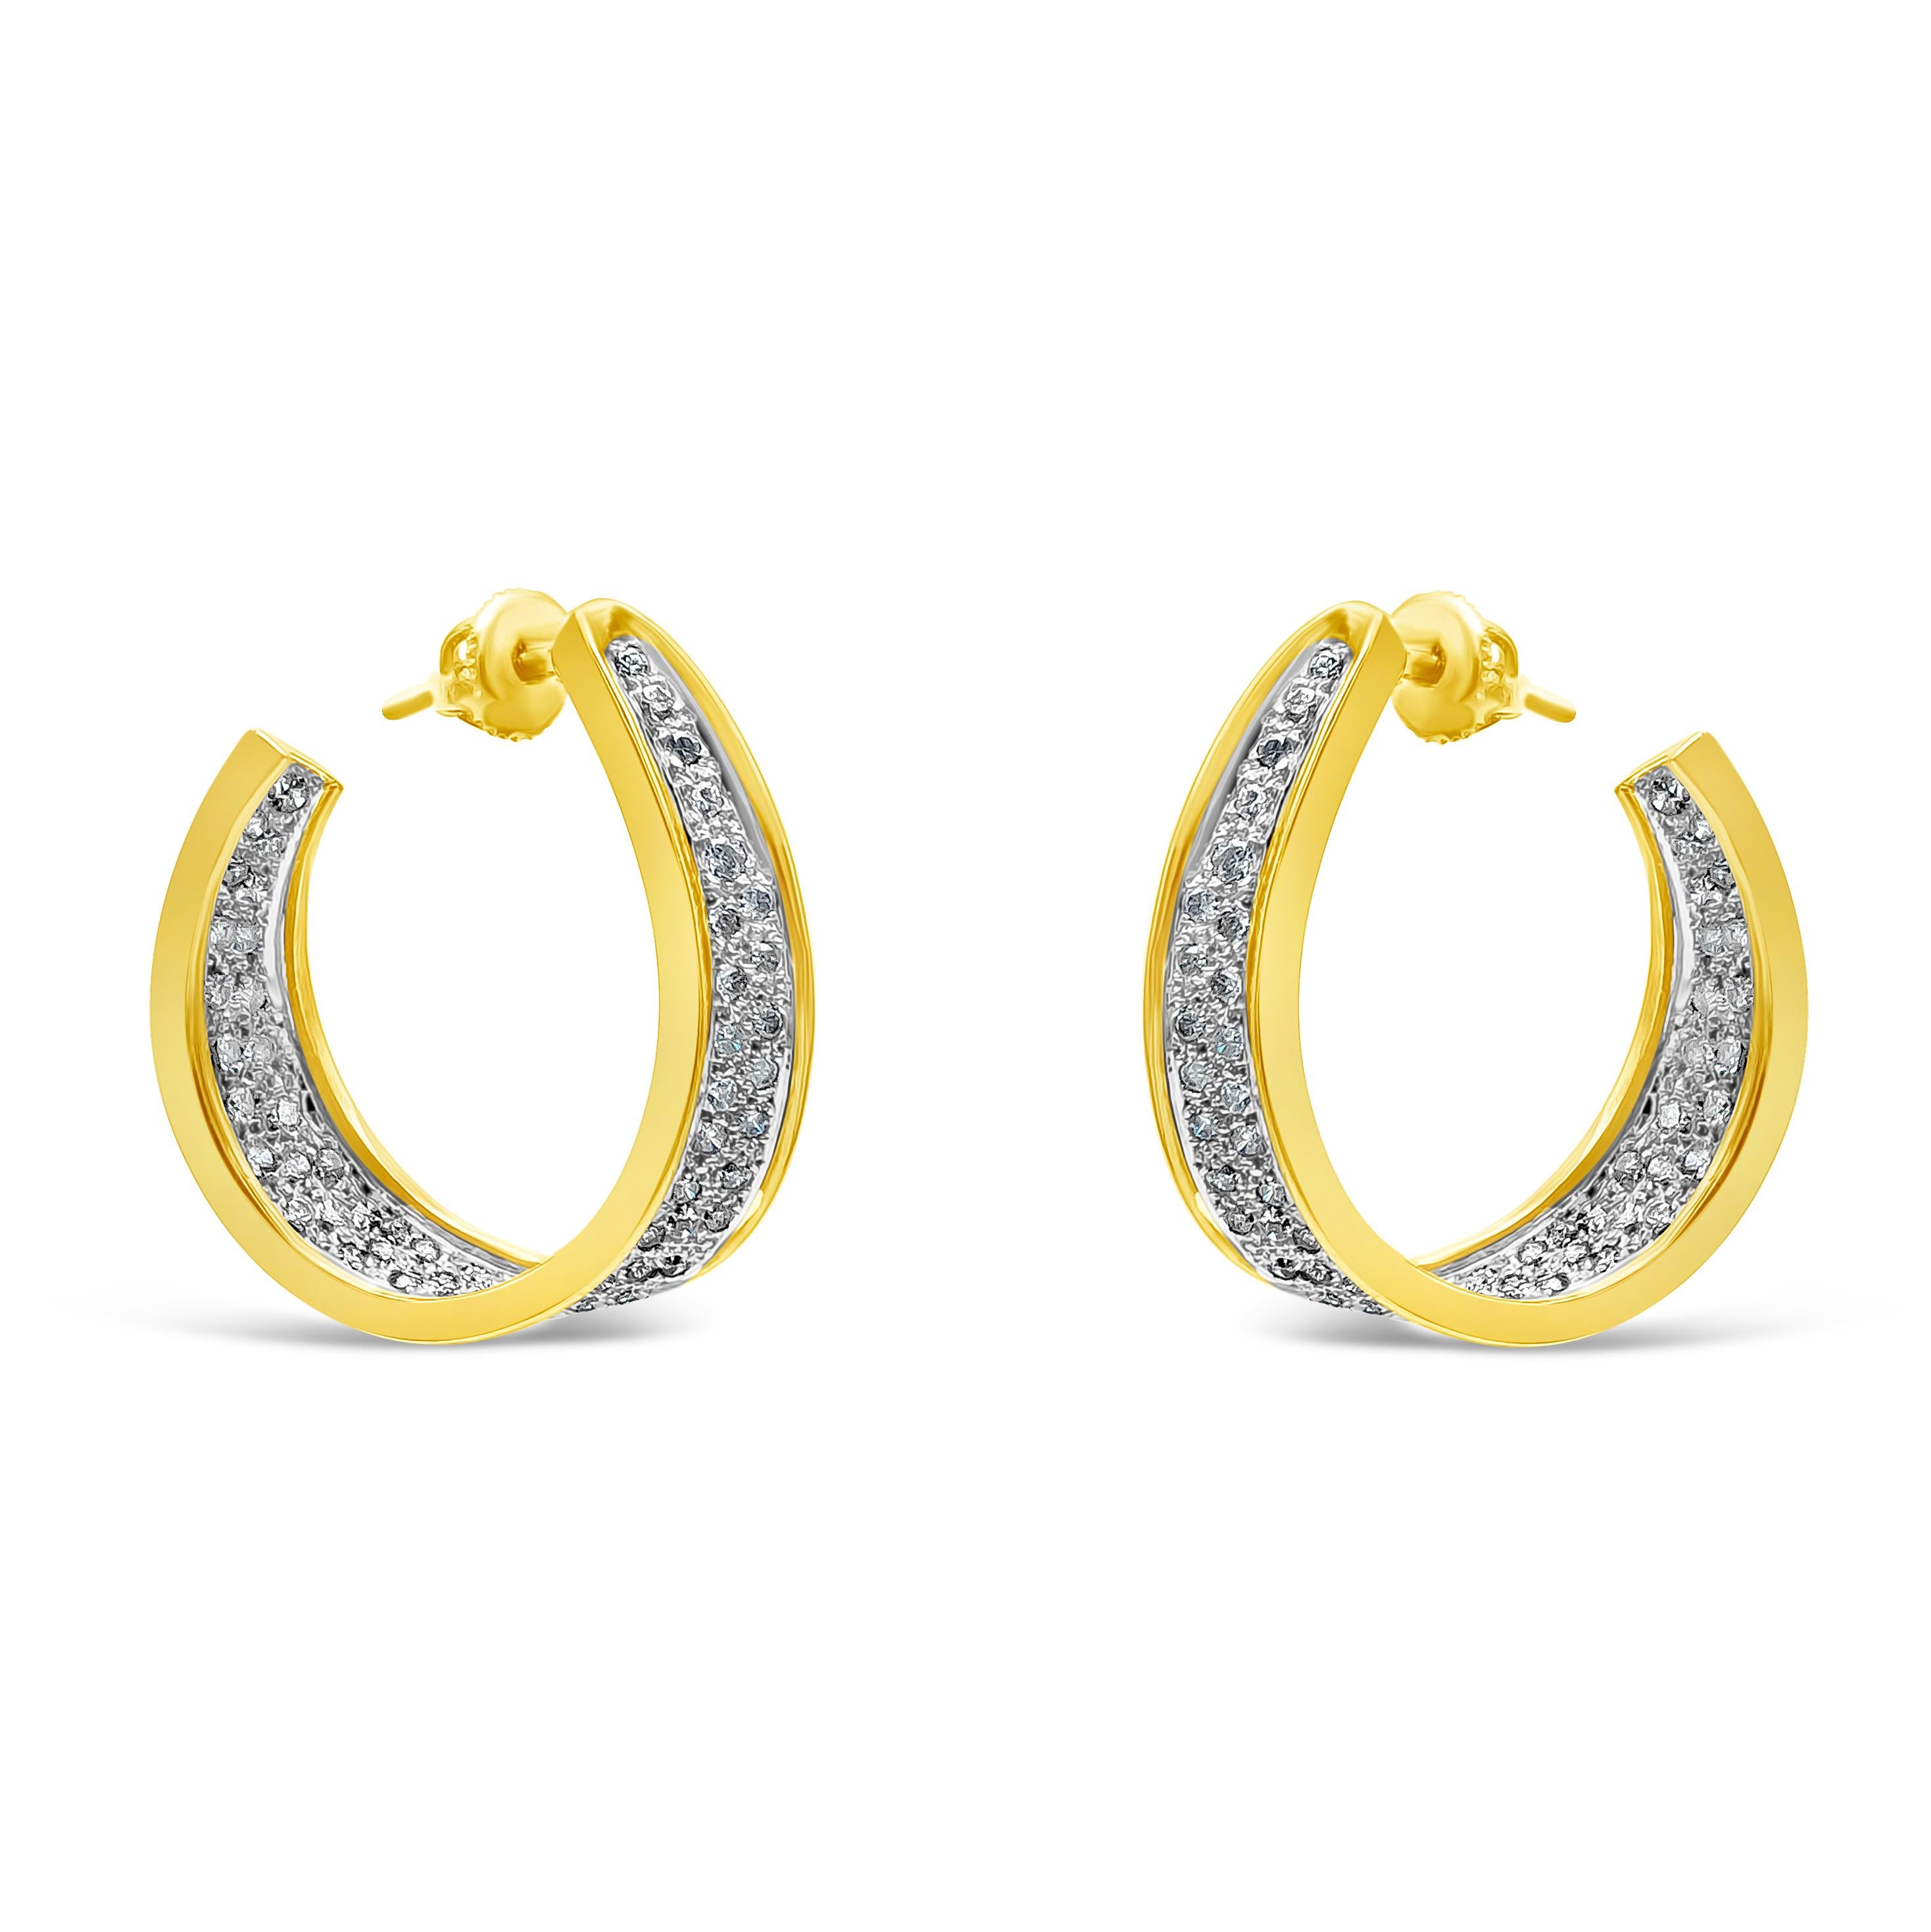 A unique hoop earrings style showcasing a cluster of round brilliant diamonds in a curved inside-out design. Diamonds weigh 2.20 carats total, F Color and I3 in Clarity. Made with 14K Yellow Gold.

Style available in different price ranges. Prices